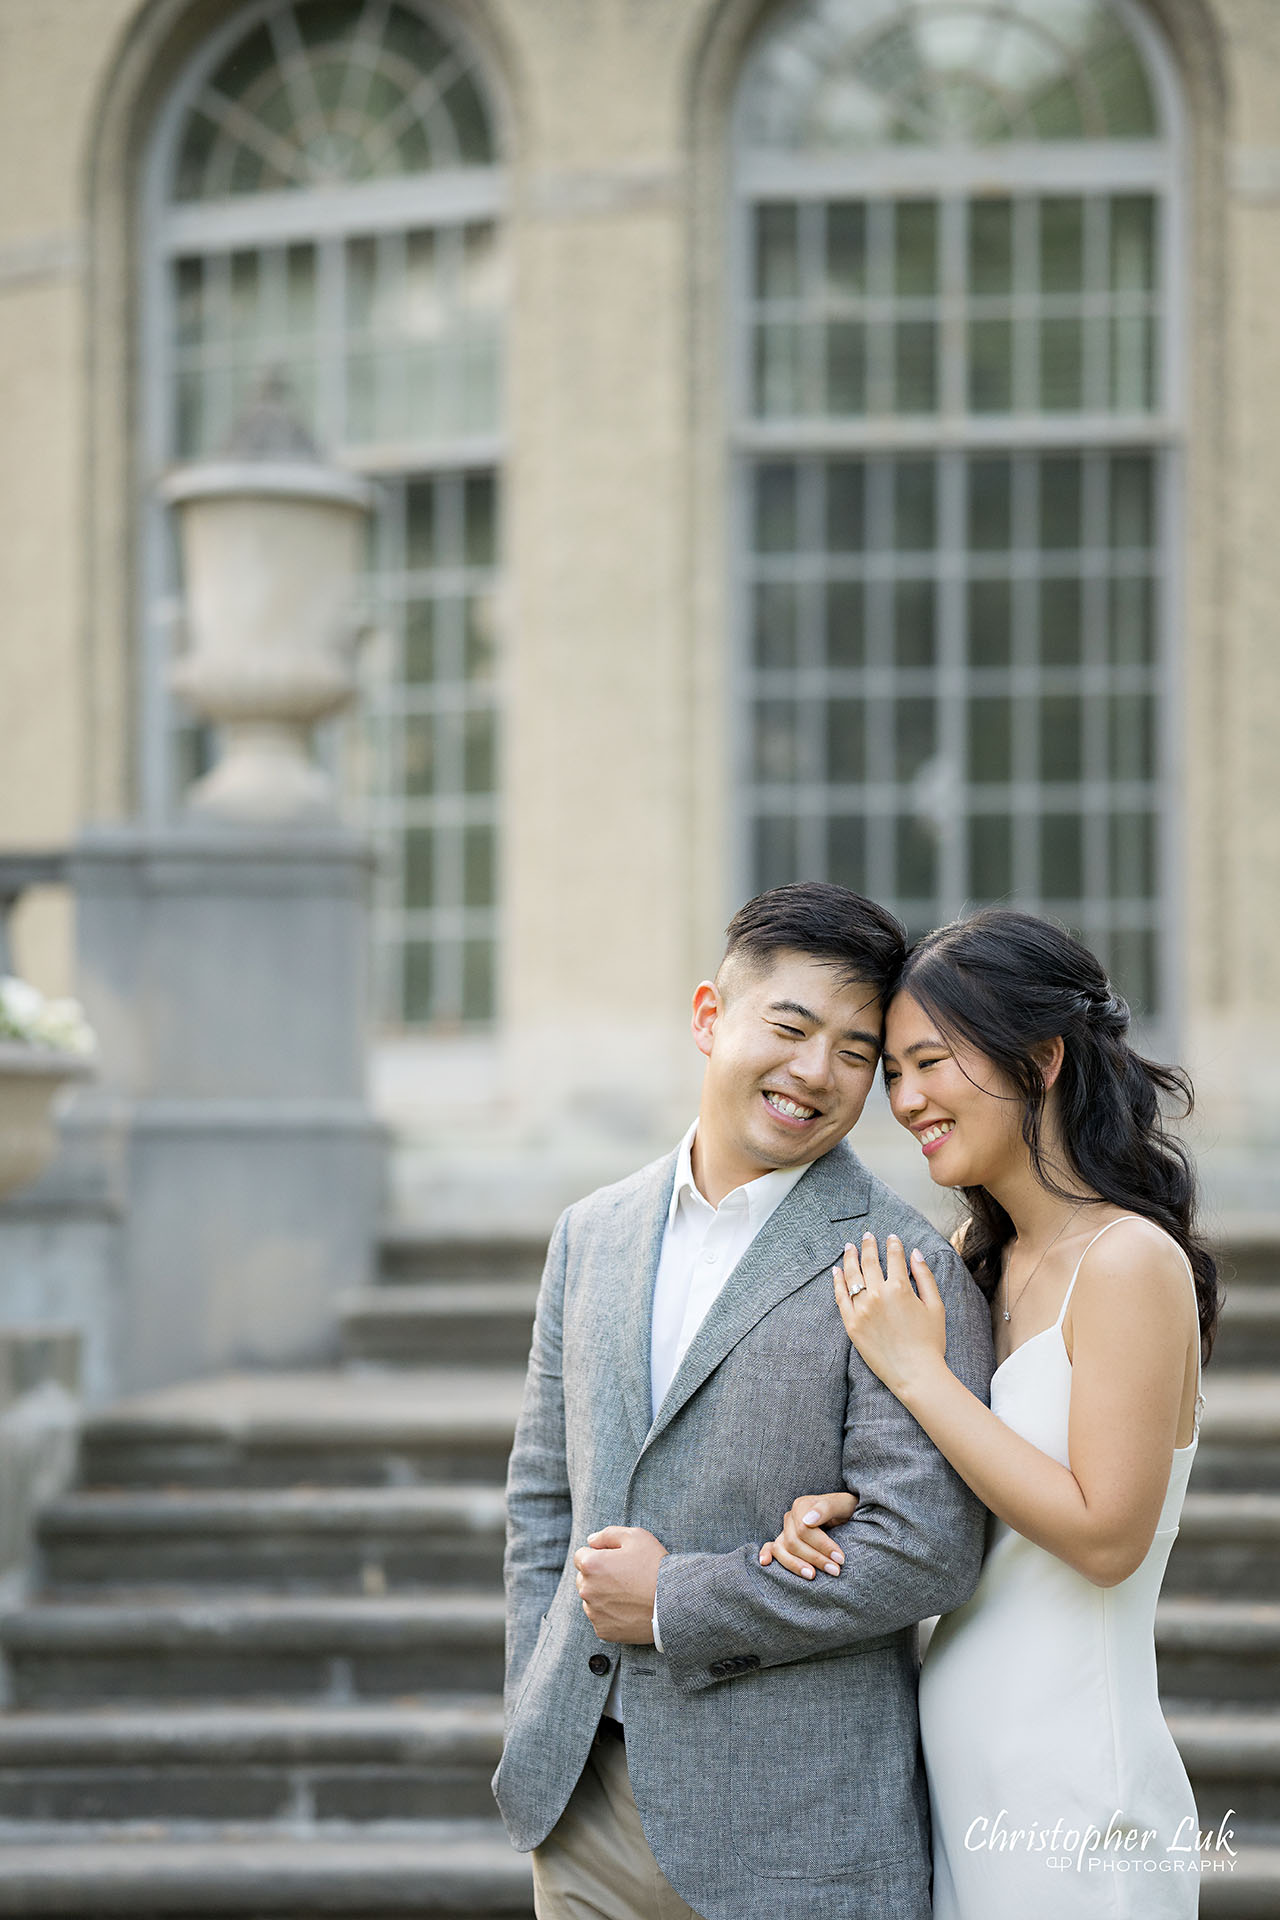 Parkwood Estate Bride Groom Engagement Session Main Lawn Garden Landscape Photojournalistic Candid Natural Organic Hug Intimate Linking Arms Smile Laugh Happy 